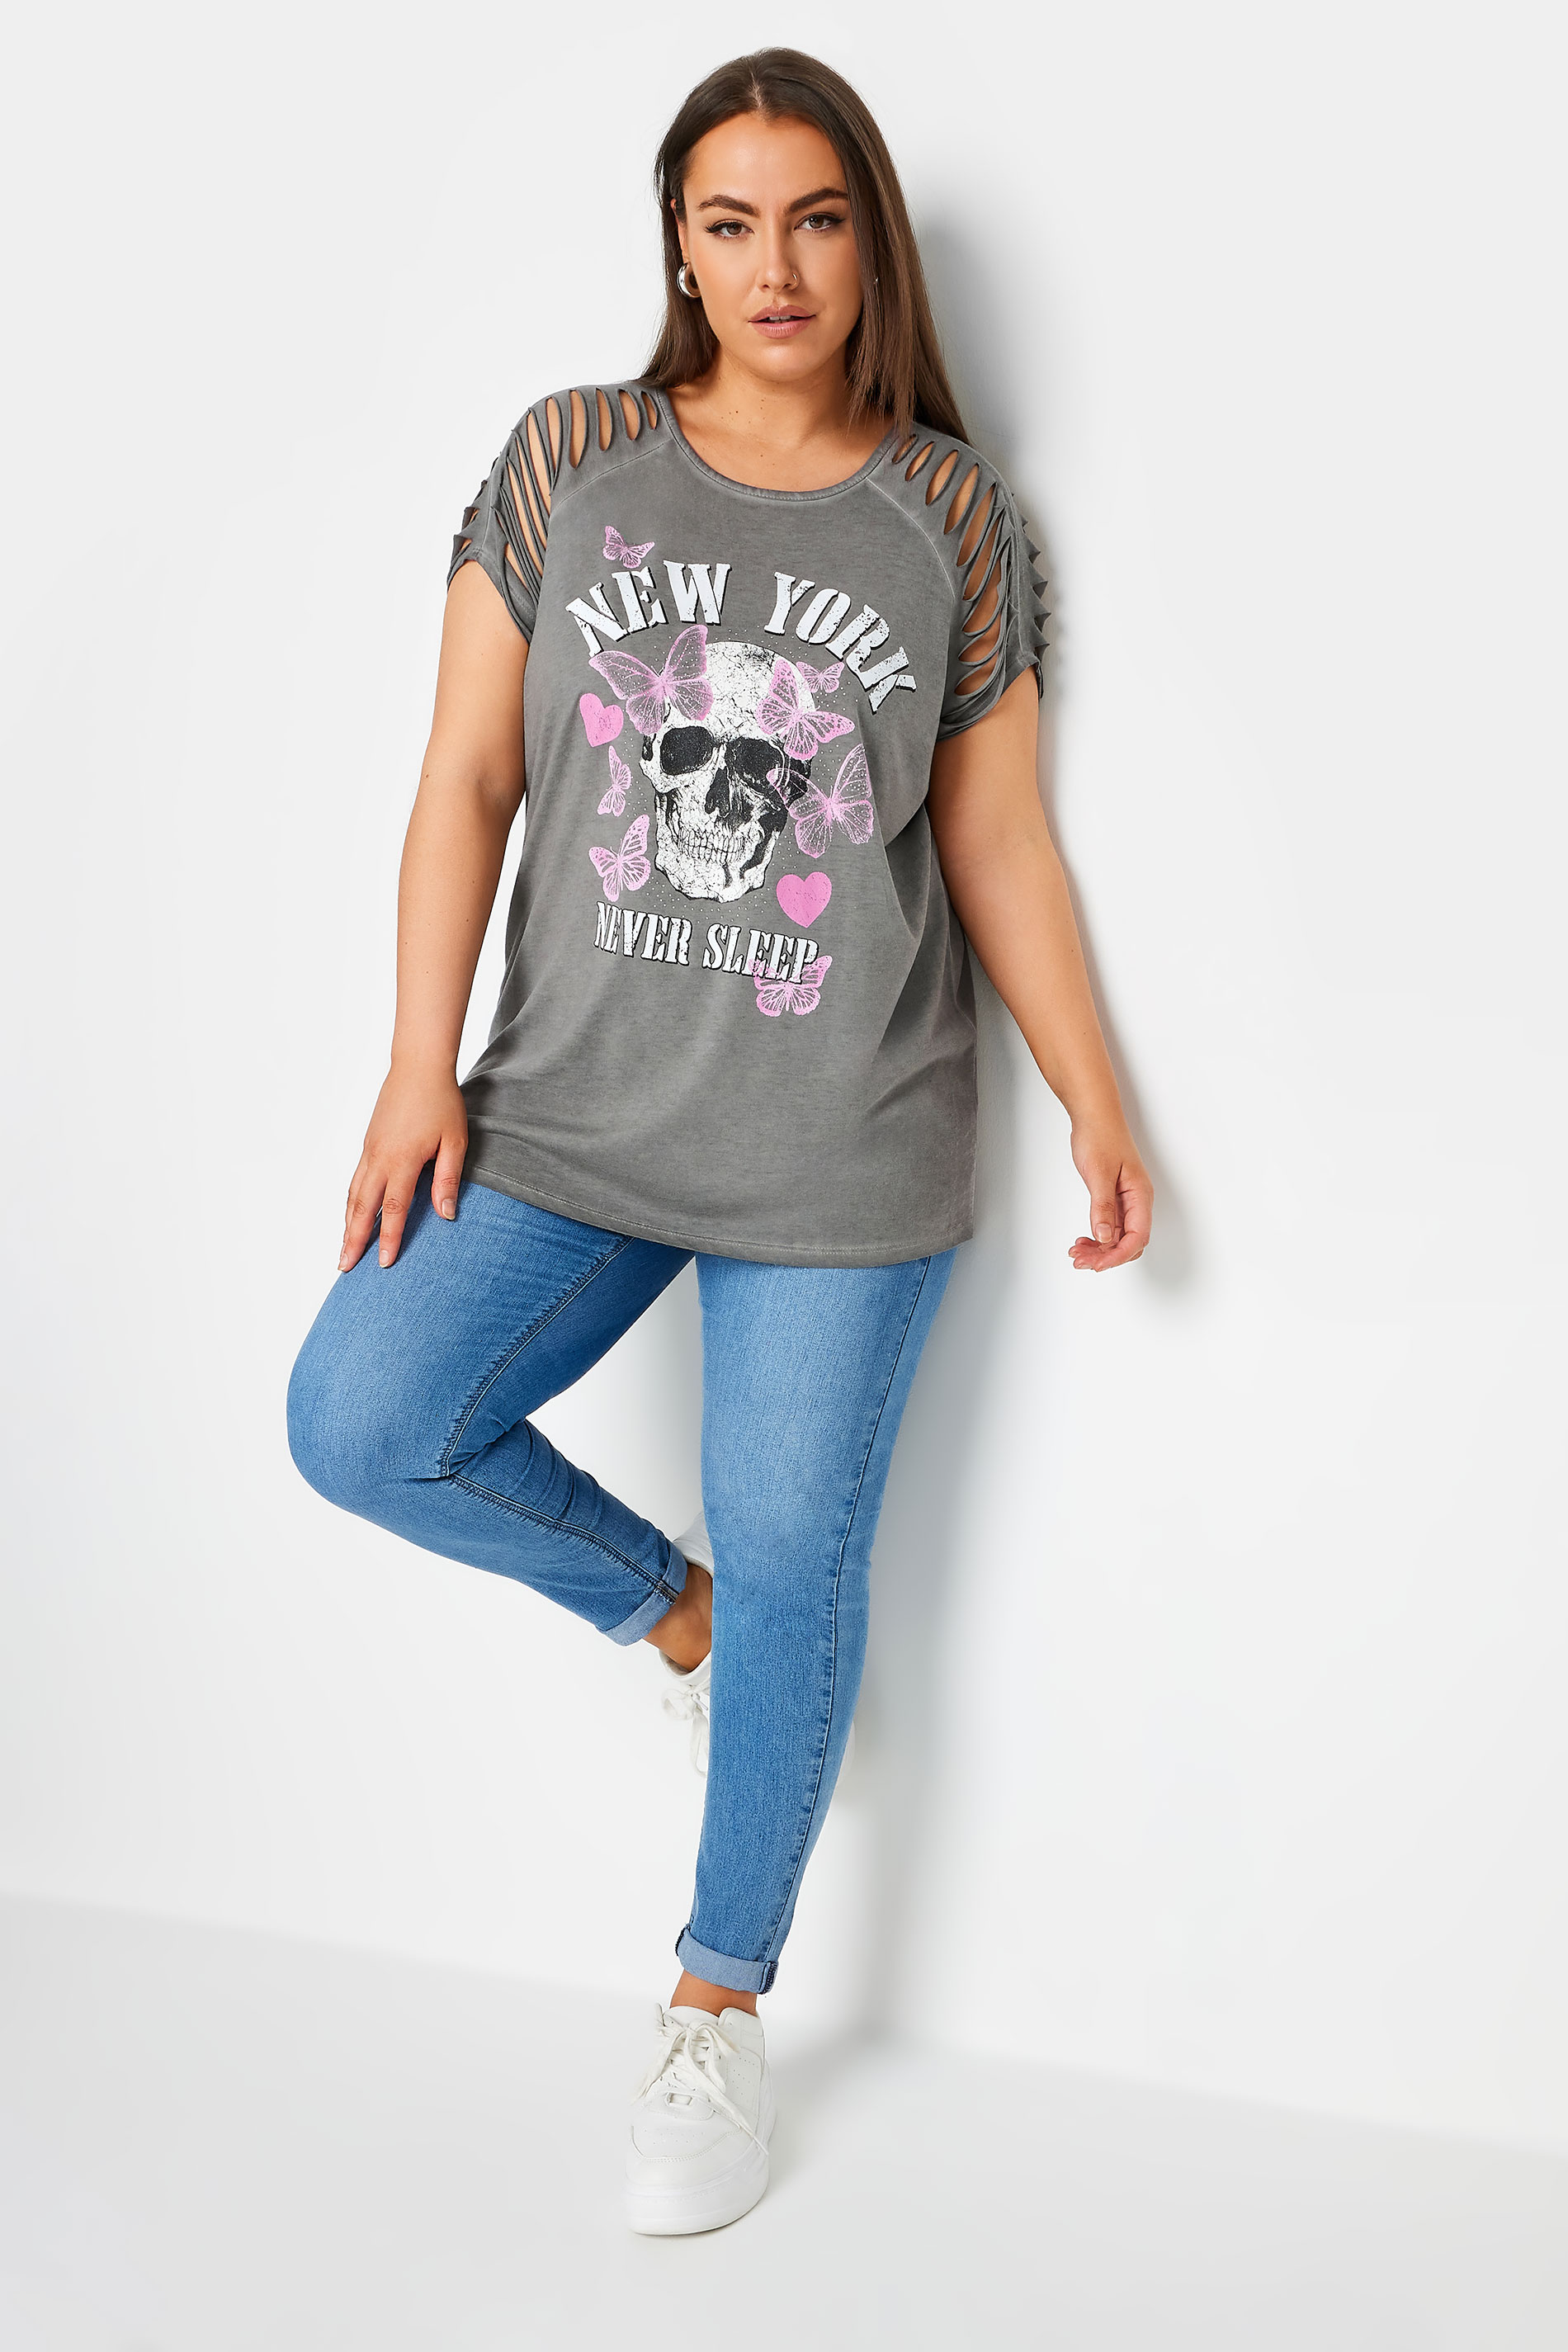 YOURS Plus Size Grey Cut Out 'New York' Slogan T-Shirt | Yours Clothing 2